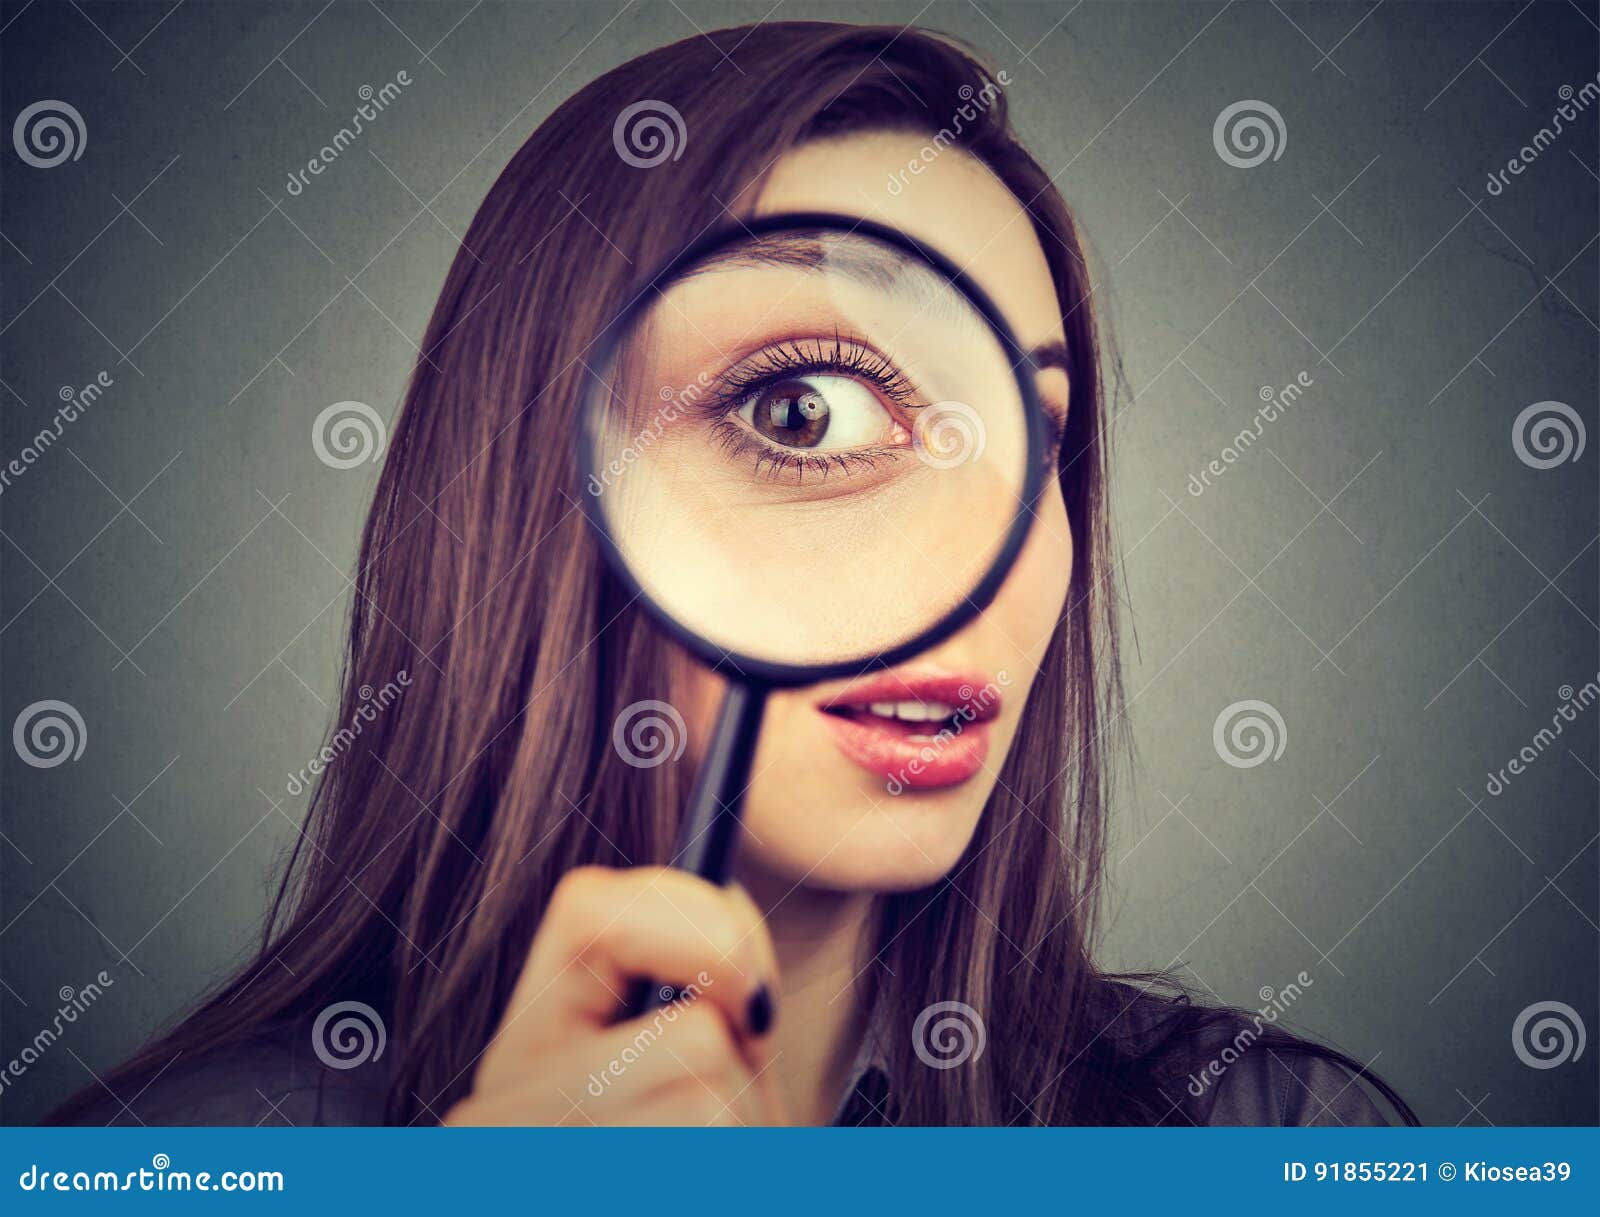 curious woman looking through a magnifying glass